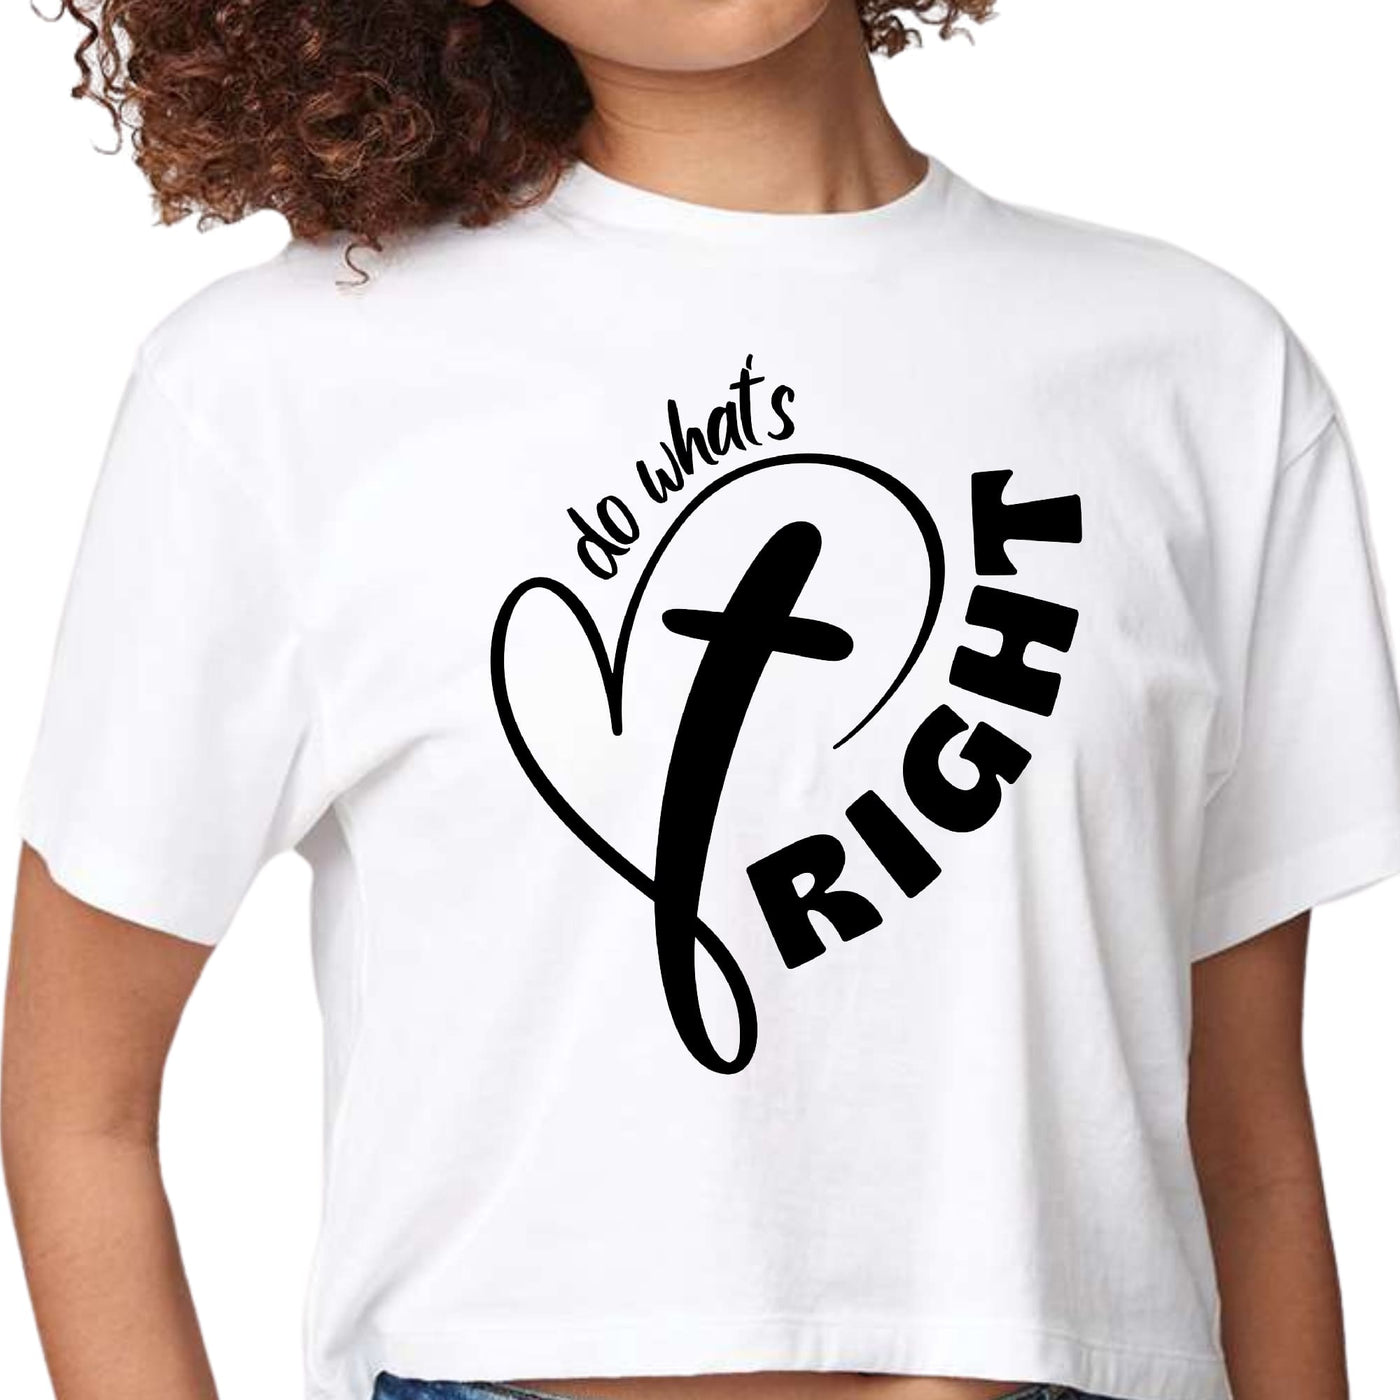 Womens Cropped Graphic T-shirt Say It Soul - Do What’s Right Black - Womens